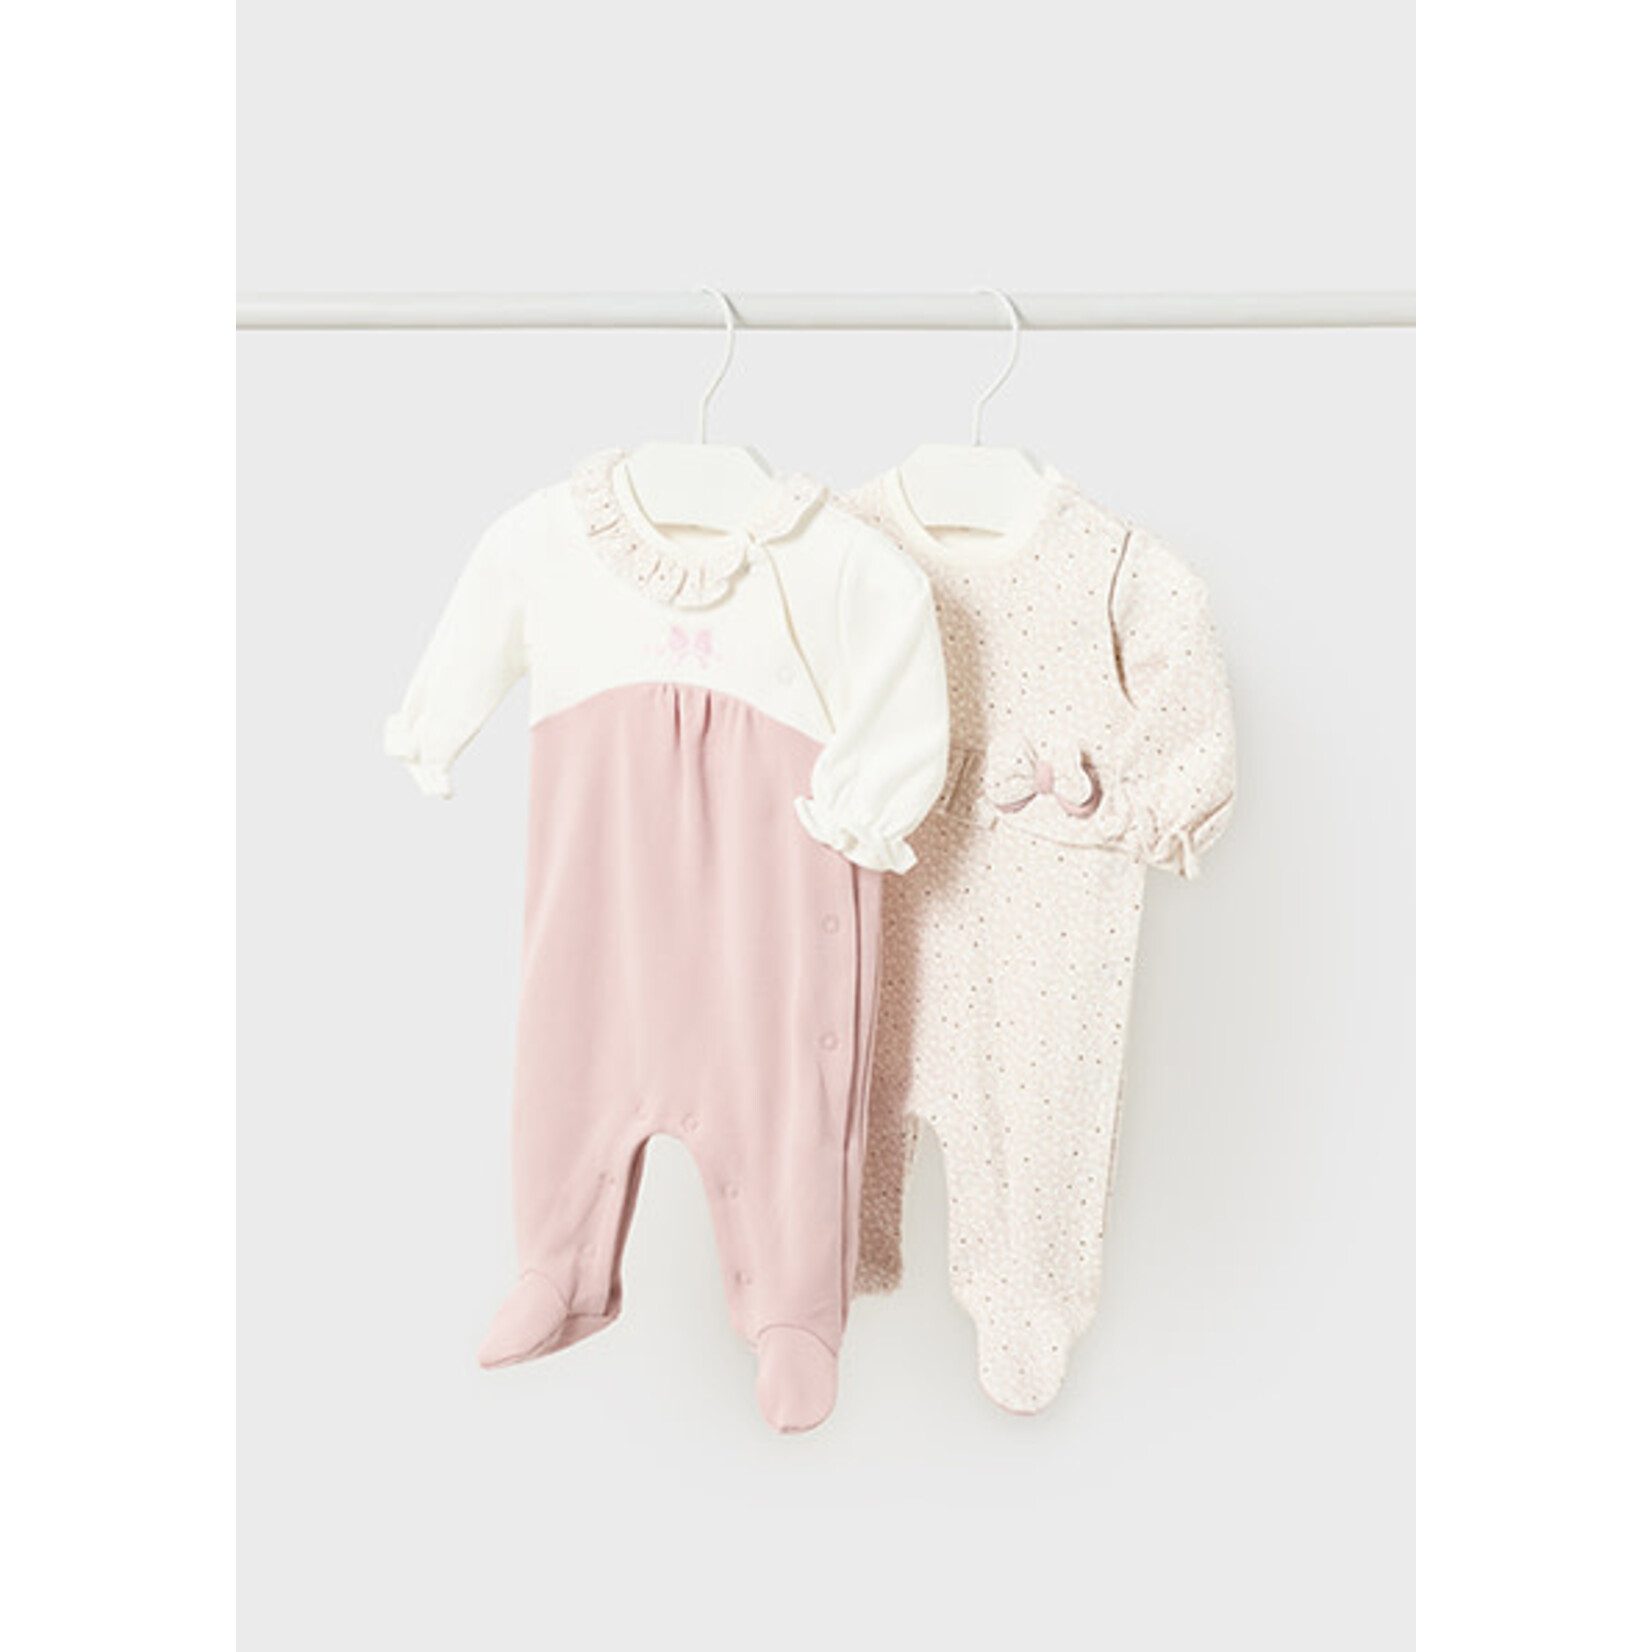 MAYORAL NEWBORN BABY COTTON FOOTED ONE-PIECE